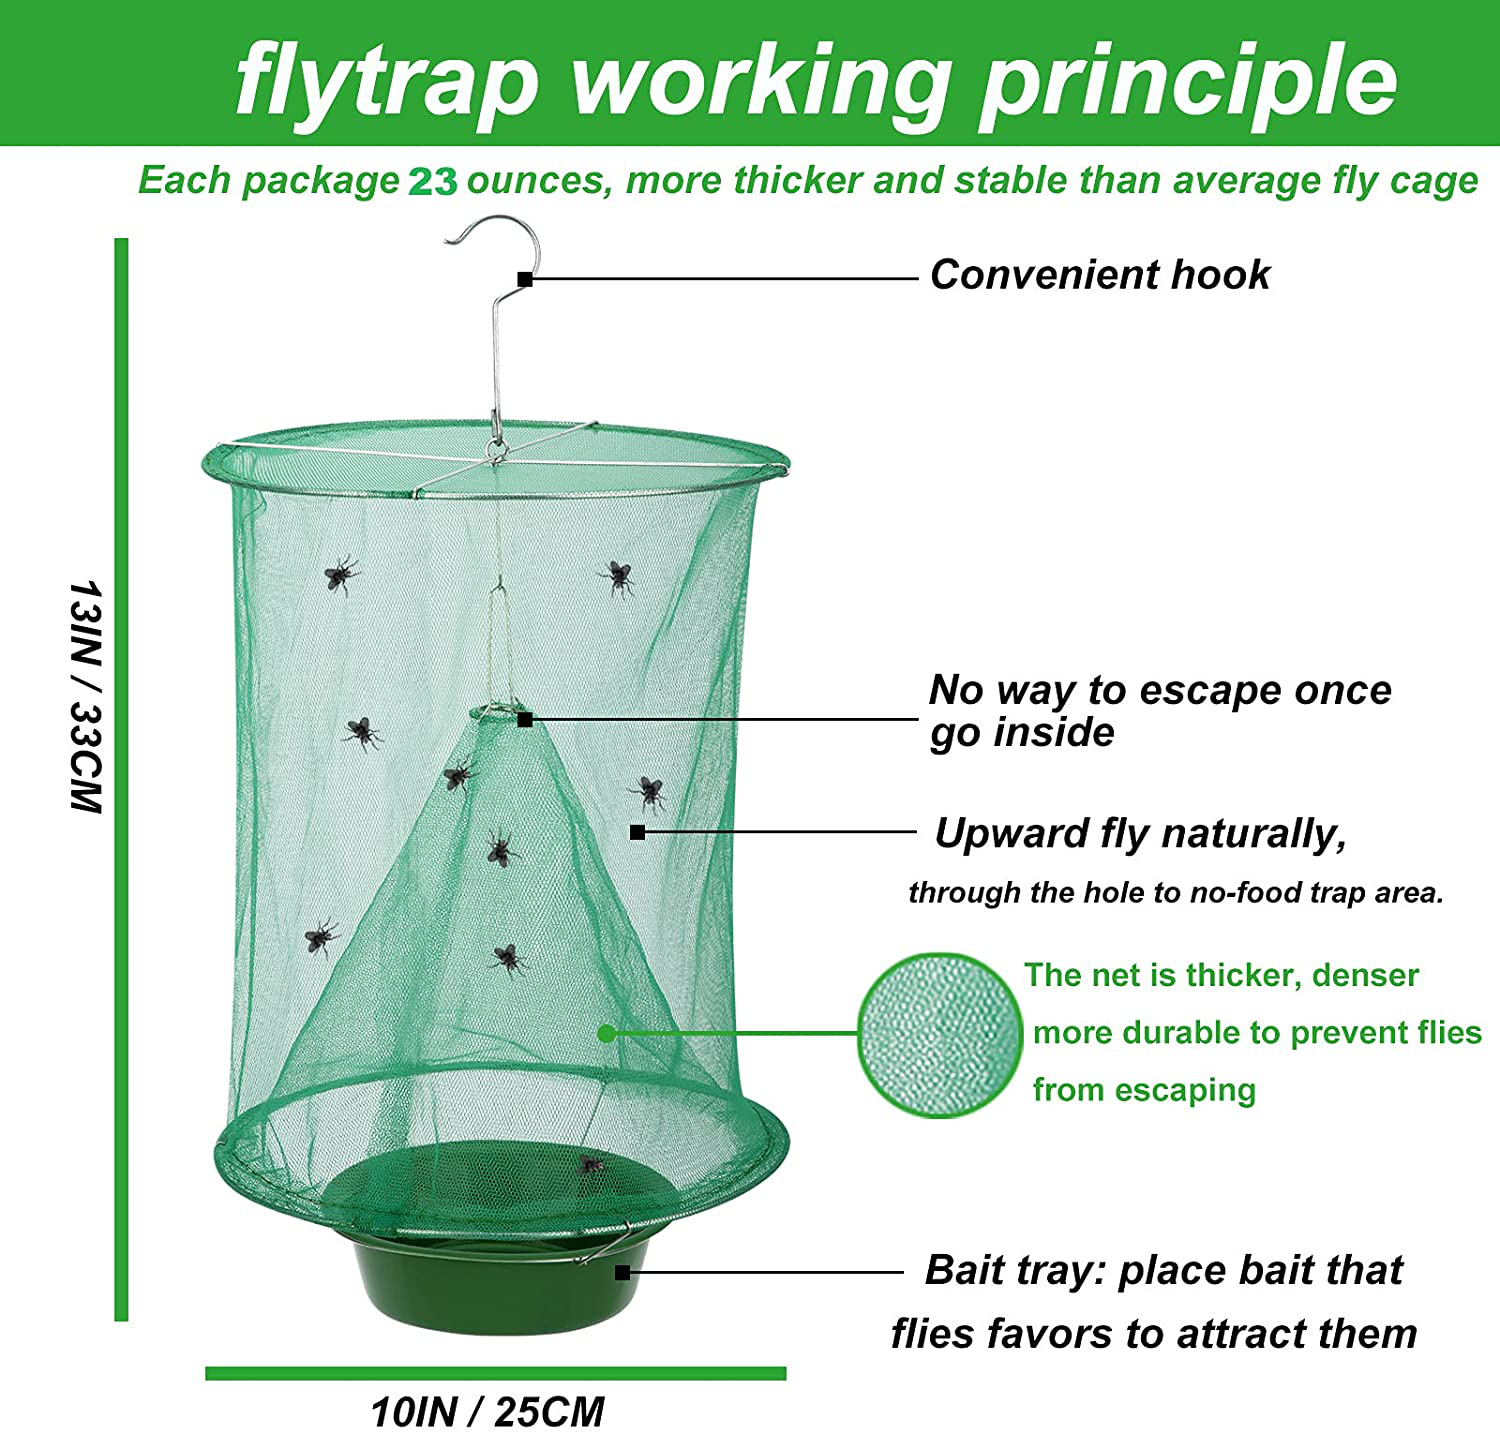 Ranch Fly Trap - Reusable Fruit Fly Trap with Bait Tray, Upgraded Flay Catcher Cage Effective Flay Bag for Indoor Outdoor Hanging Family Farms,Horse Stable,Garden,Orchard,Park,Restaurants（4 Pack